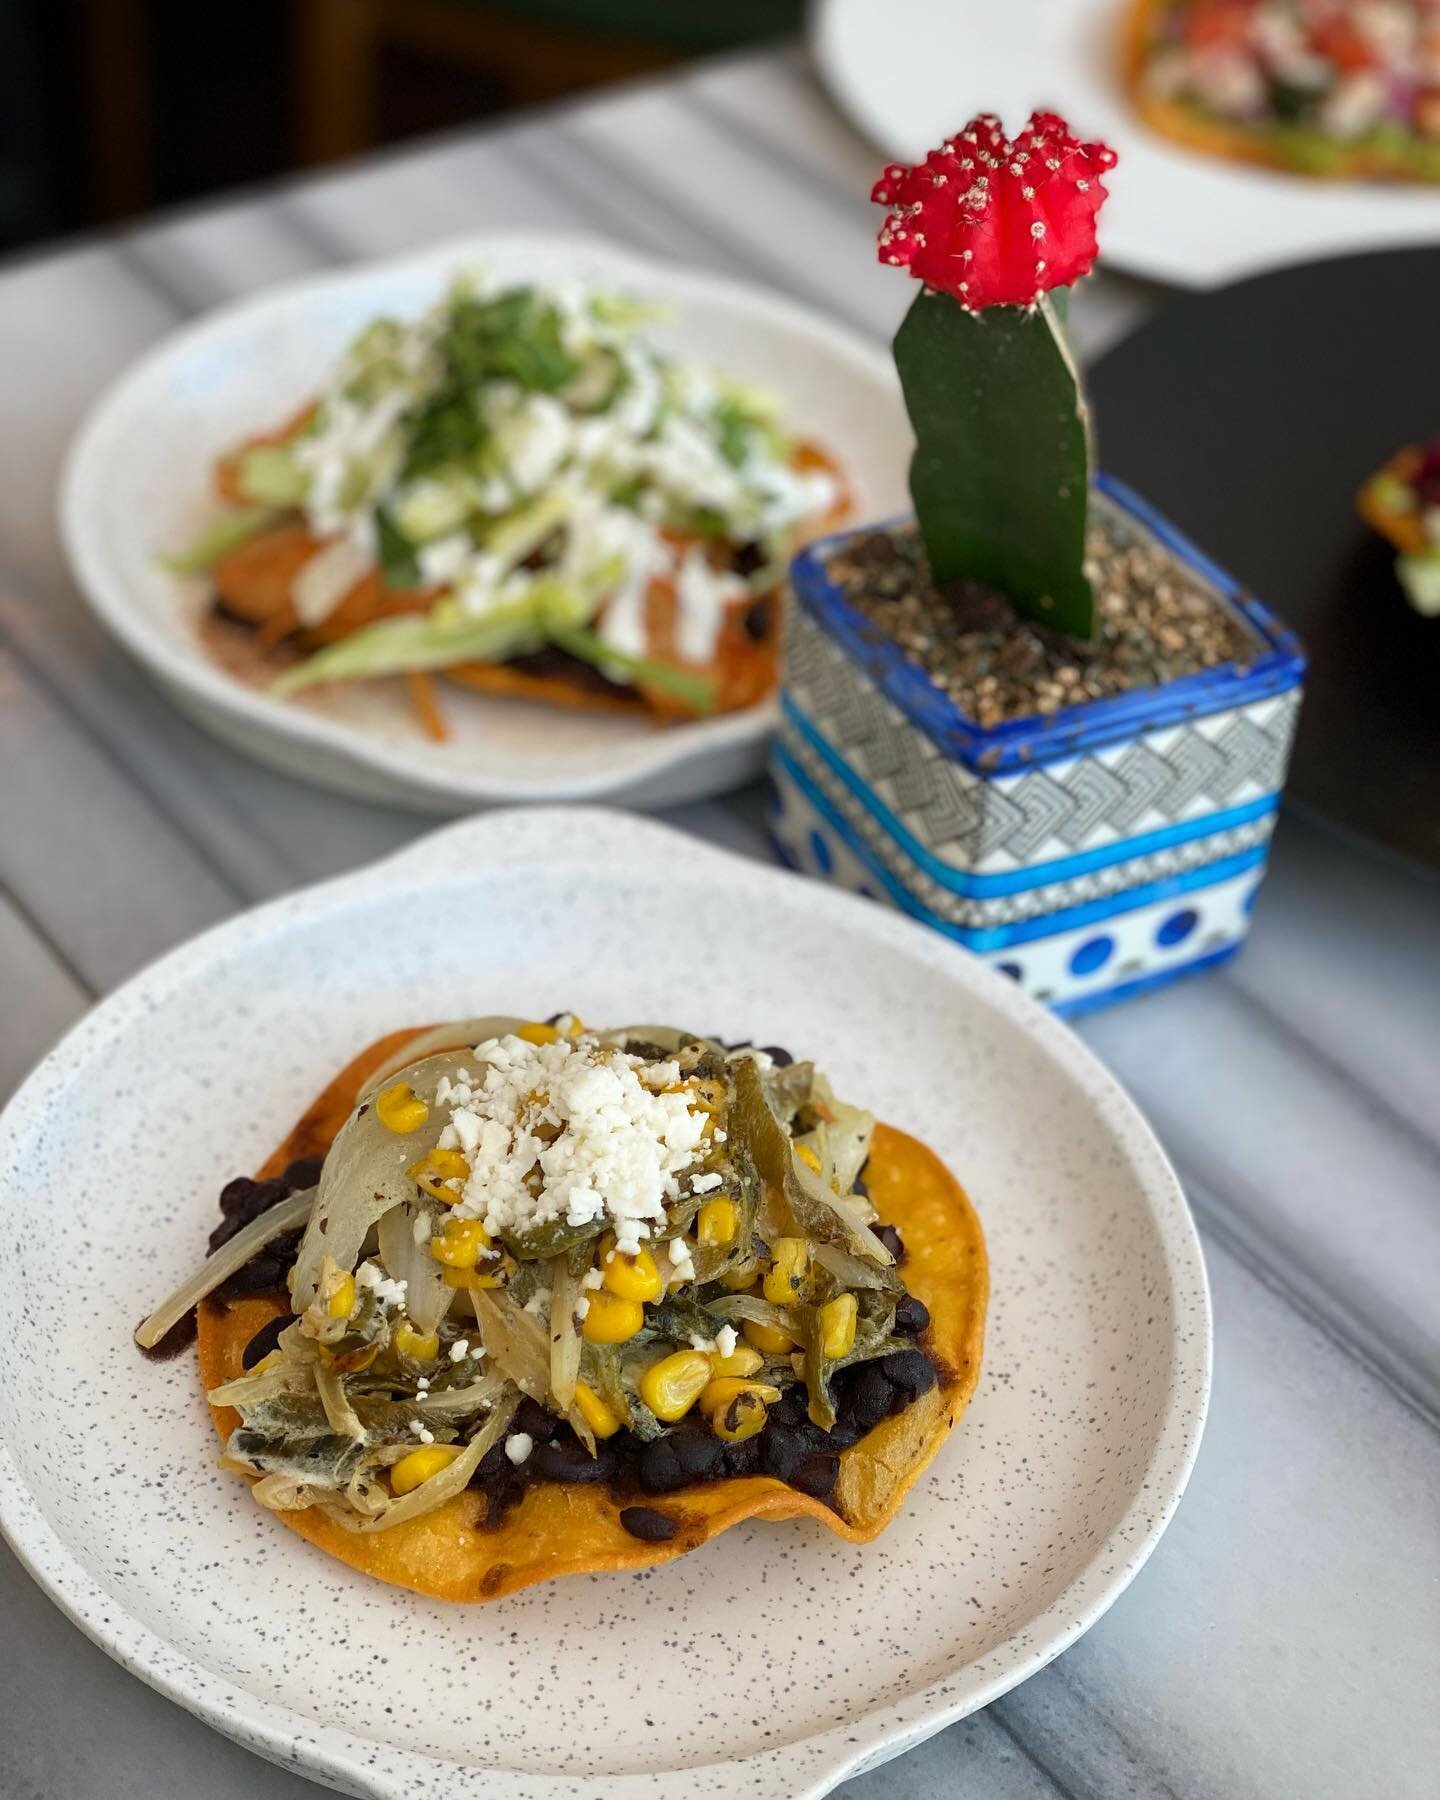 We&rsquo;ll be open for our regular hours this weekend (July 1st as well), Thur-Tue from 12-9. ⁣
⁣
Come see us for tacos, tequila and everything in between! 🌮 💃 ⁣